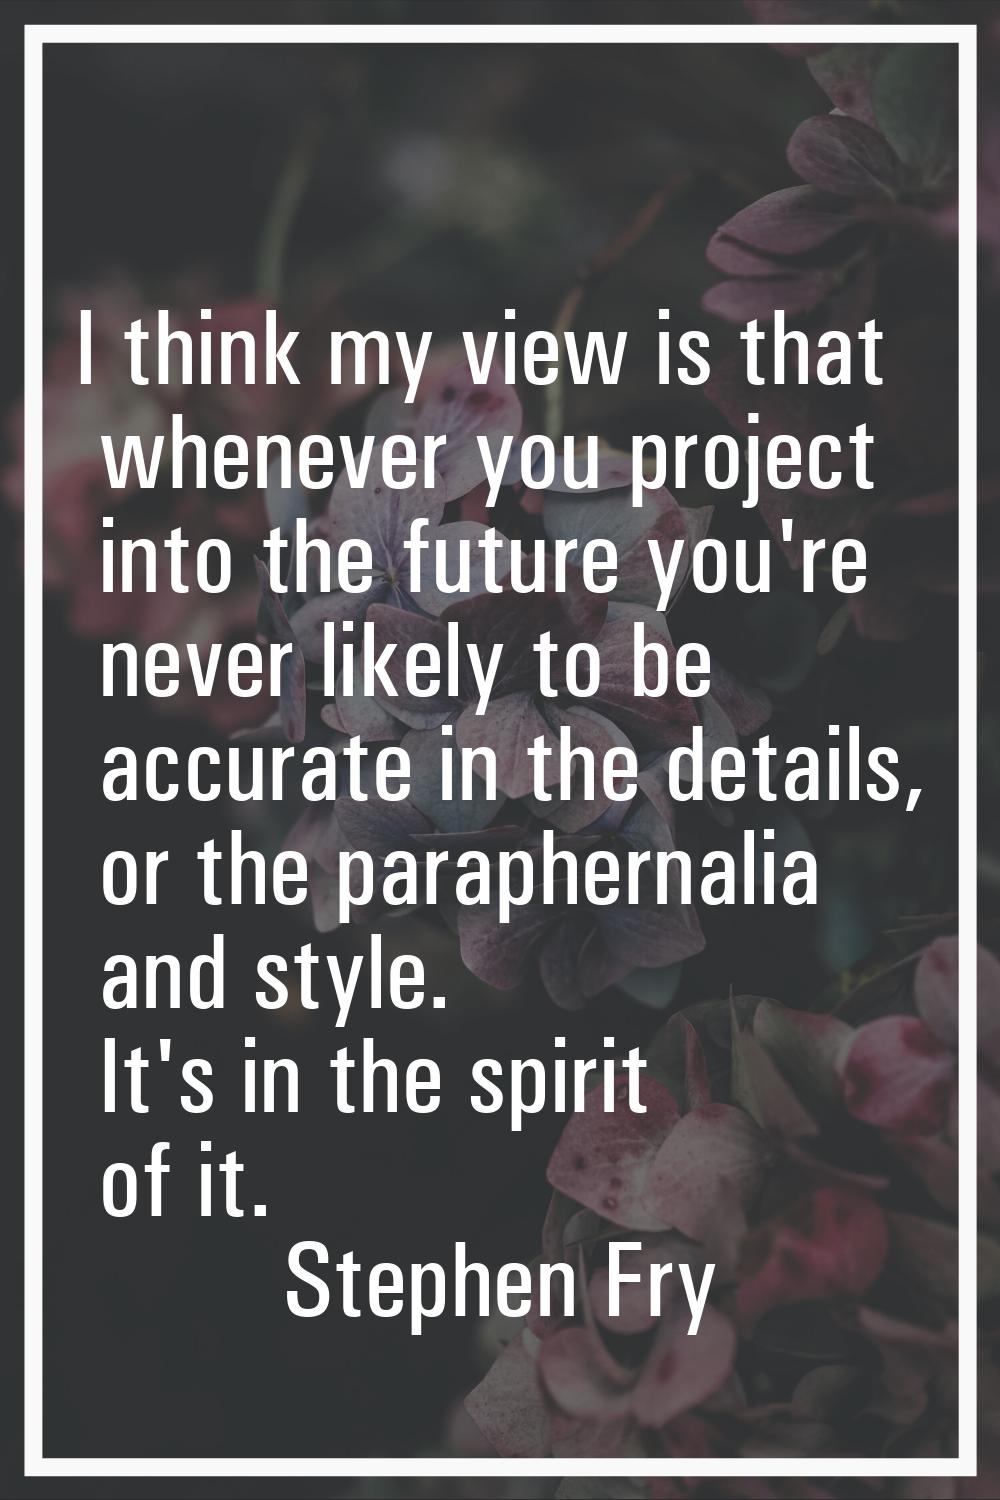 I think my view is that whenever you project into the future you're never likely to be accurate in 